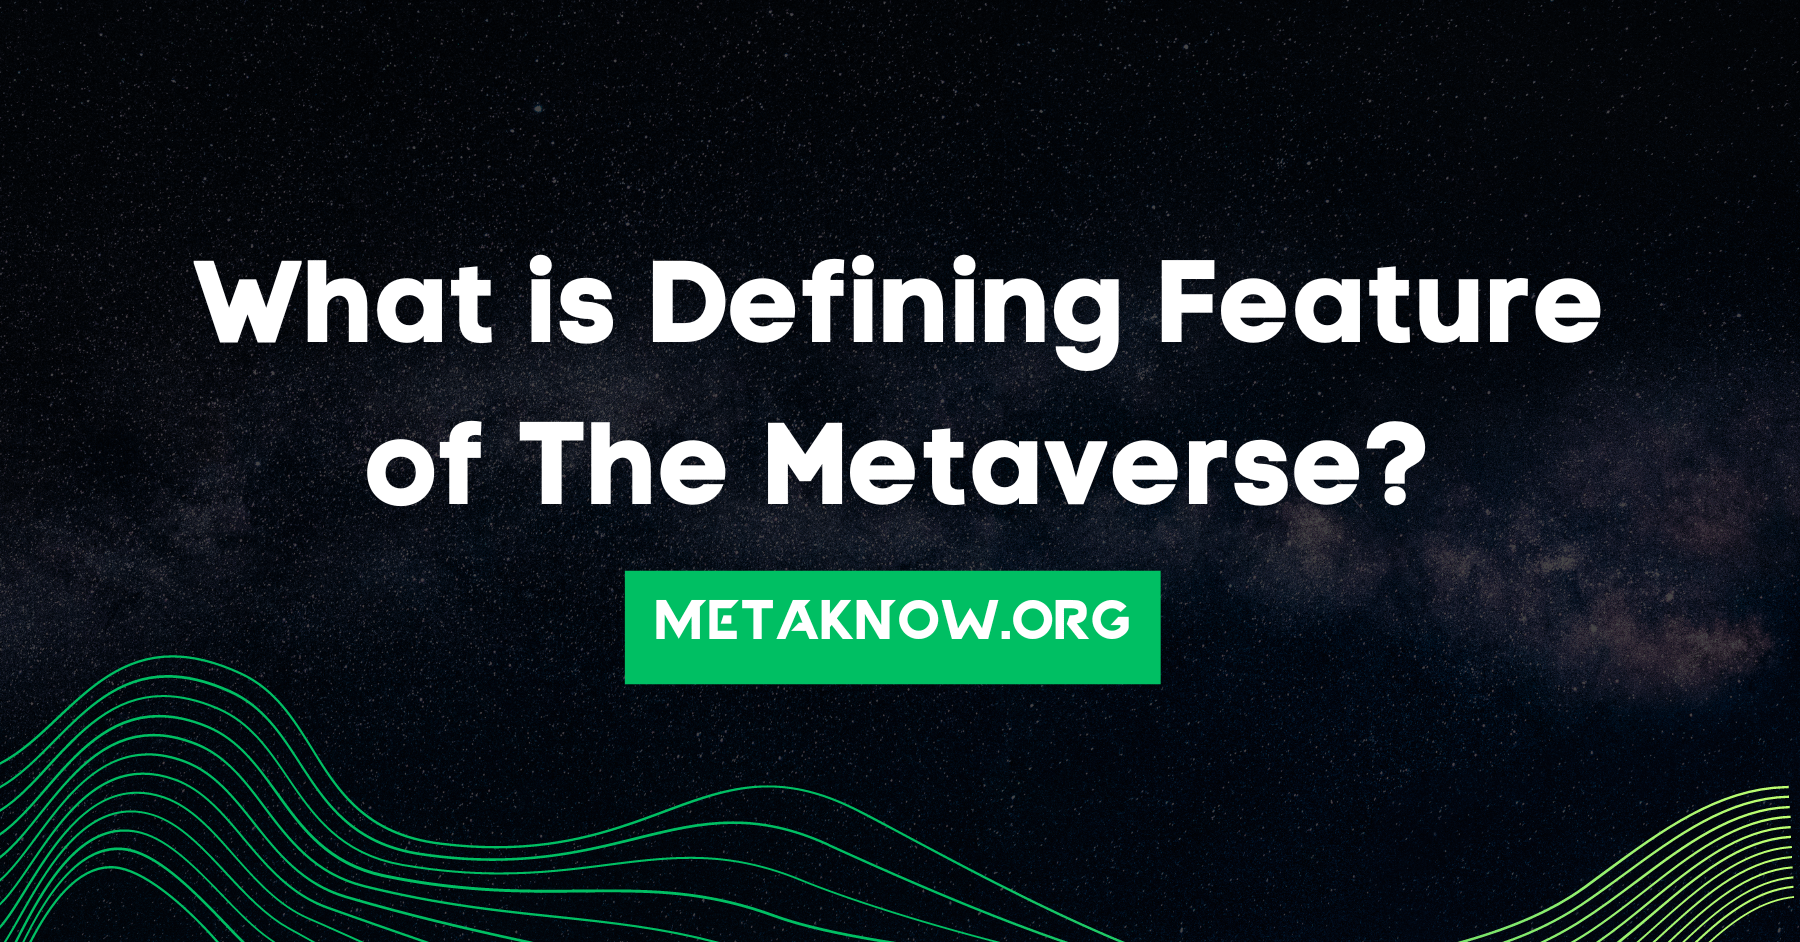 defining feature of metaverse